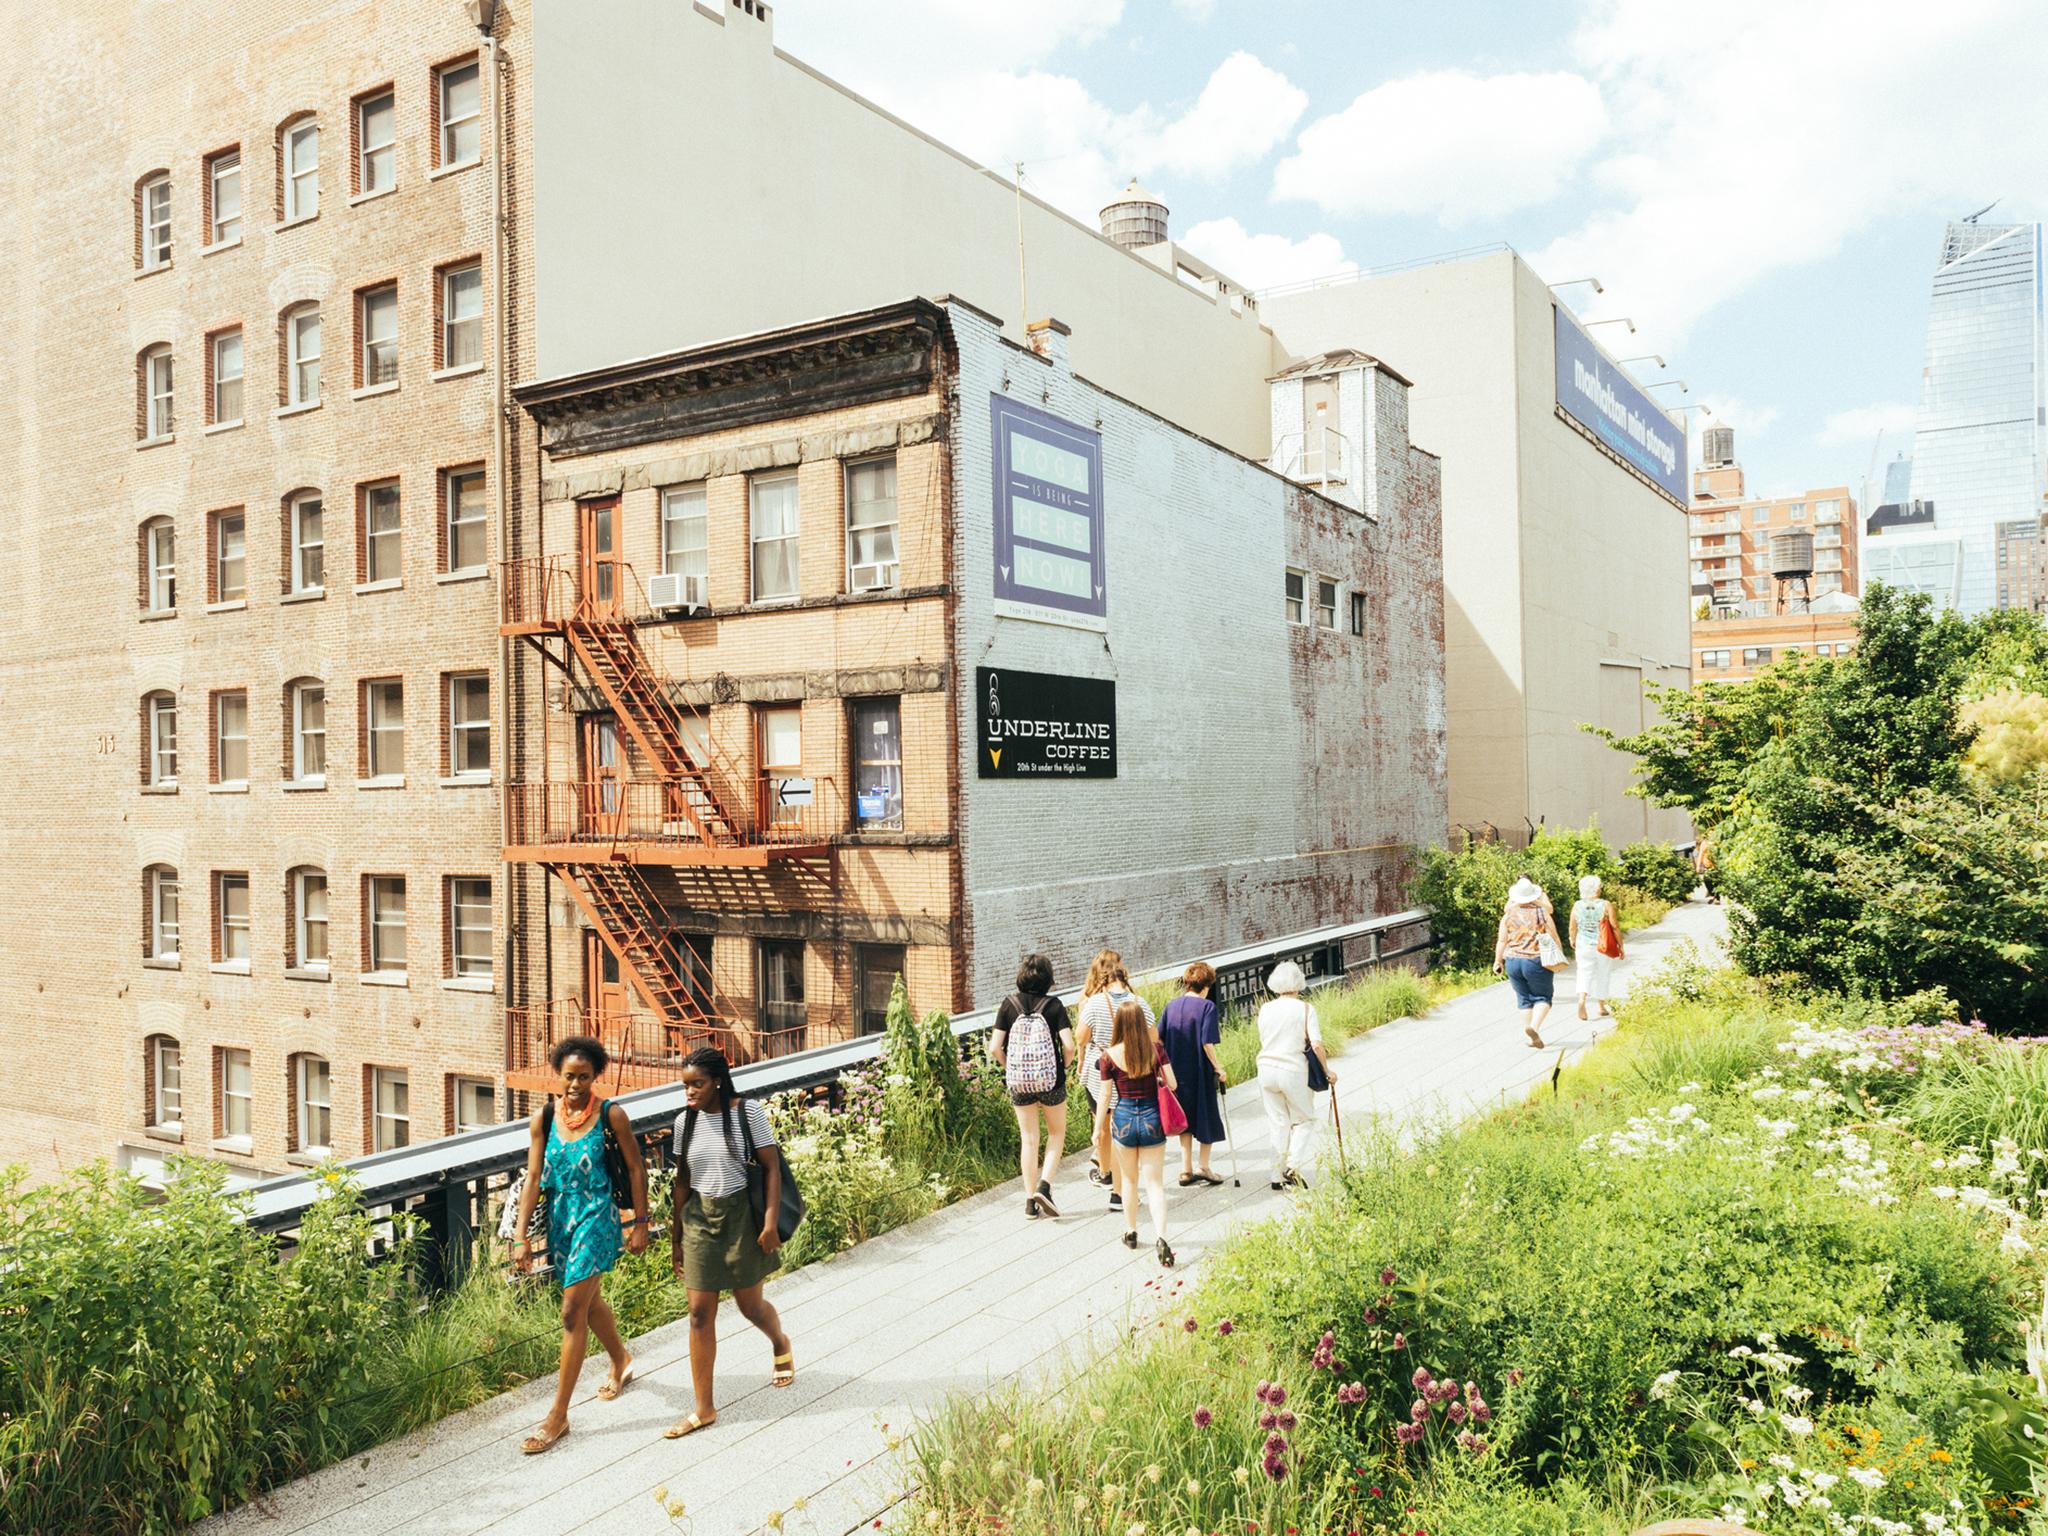 The wildlife in New York’s High Line park was inspired by the plants that had naturally colonised the disused railway viaduct